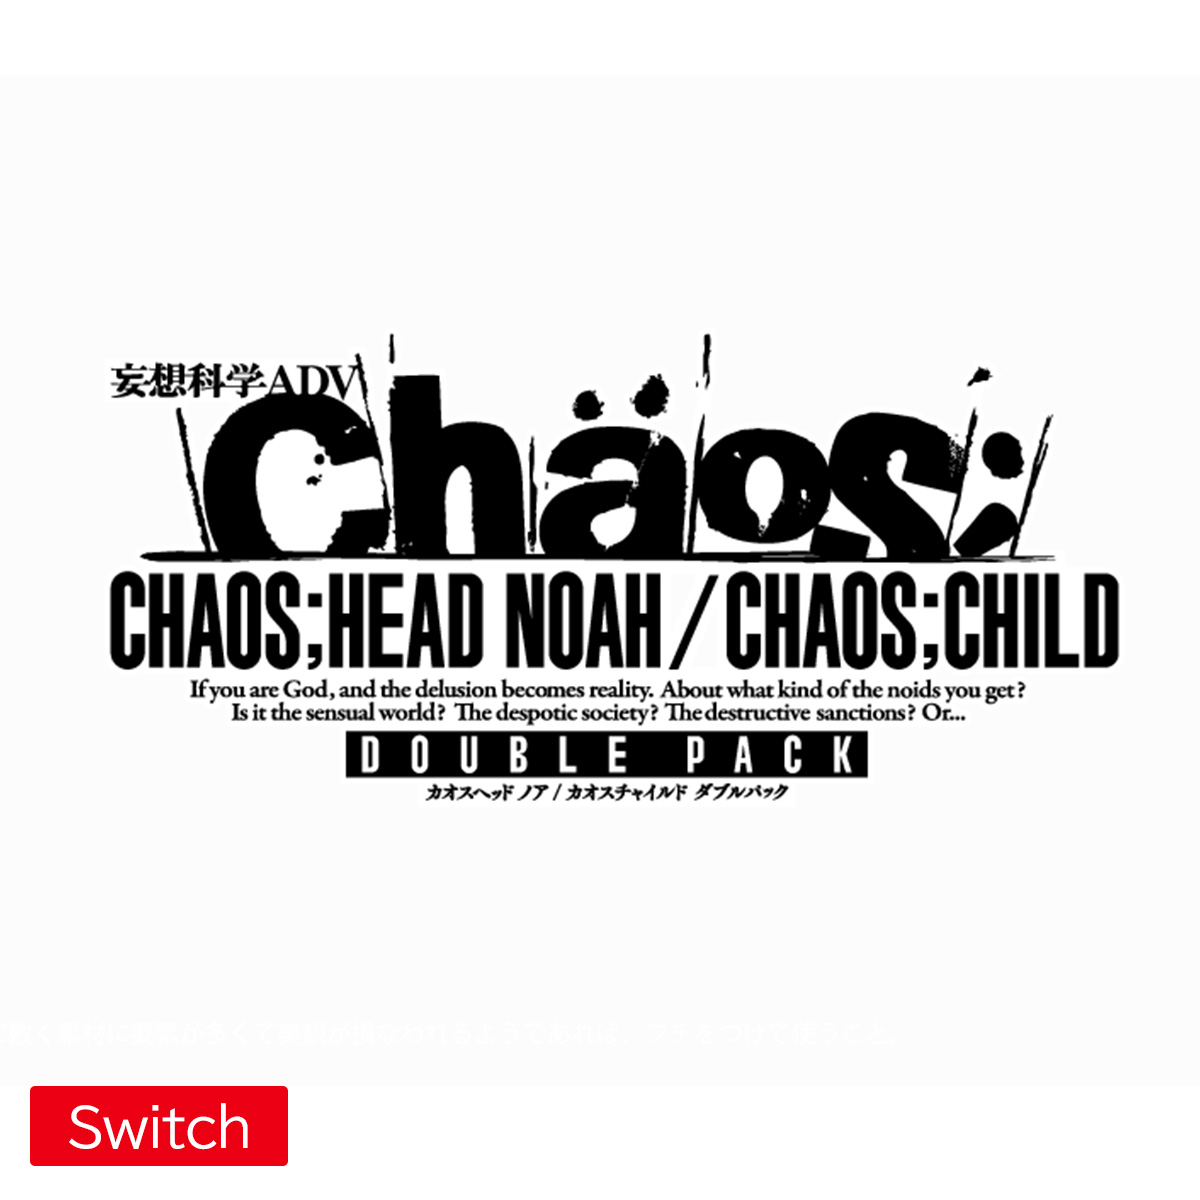 ［Switch］ CHAOS；HEAD NOAH／CHAOS；CHILD DOUBLE PACK